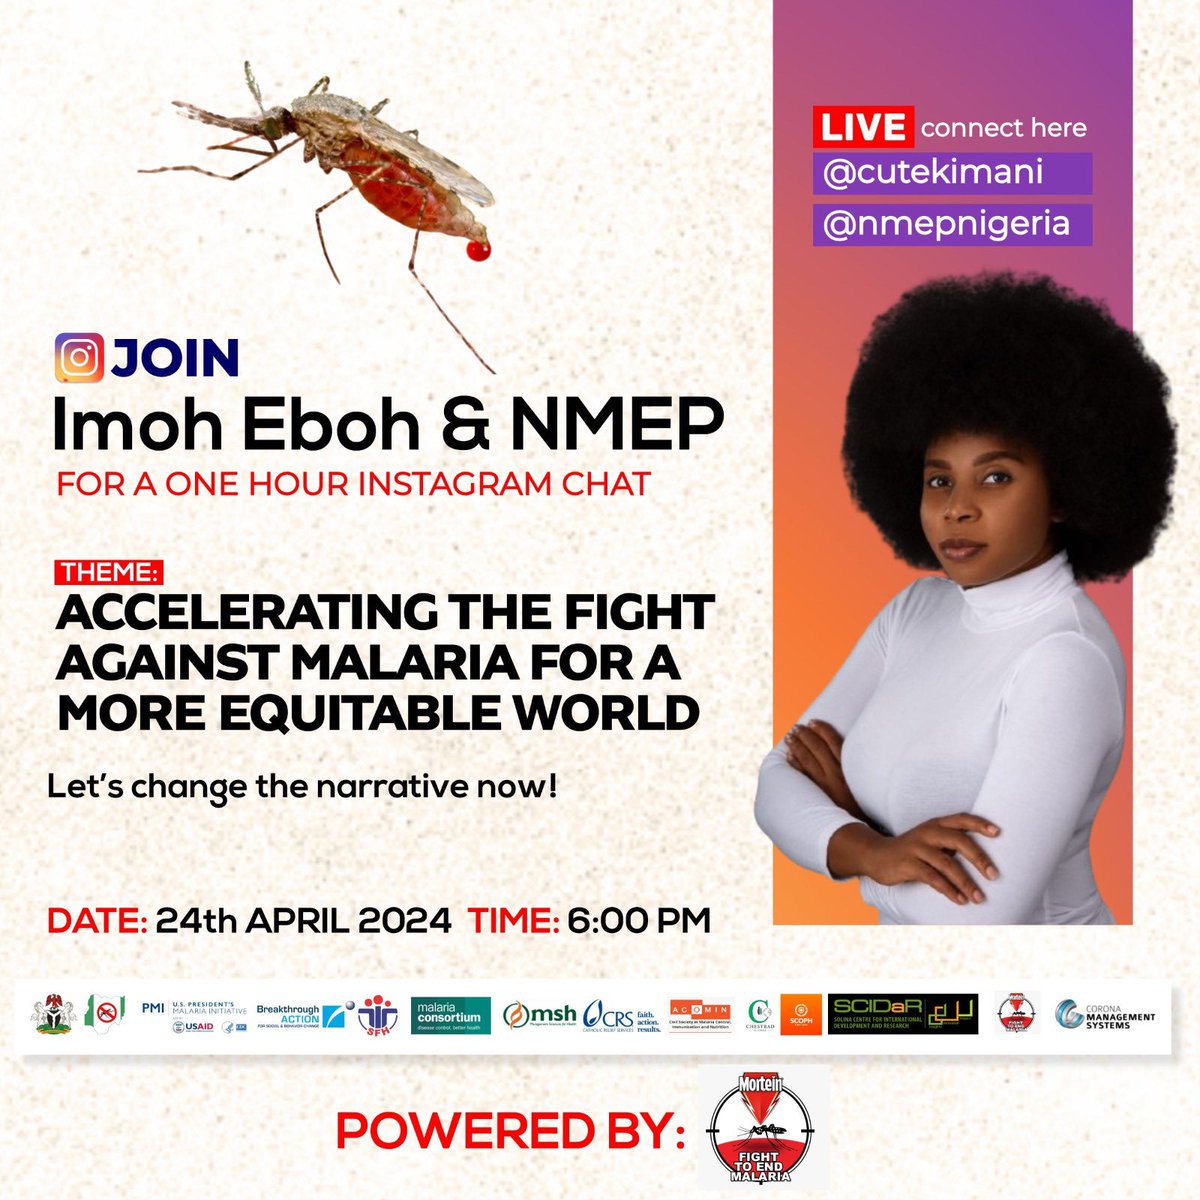 Missed our TweetChat on accelerating the fight against malaria? Don’t worry! Join us for an IG Live session tomorrow to catch up on the conversation and learn how you can be part of the movement. Stay tuned for more details! #ZeroMalariaStartsWithMe